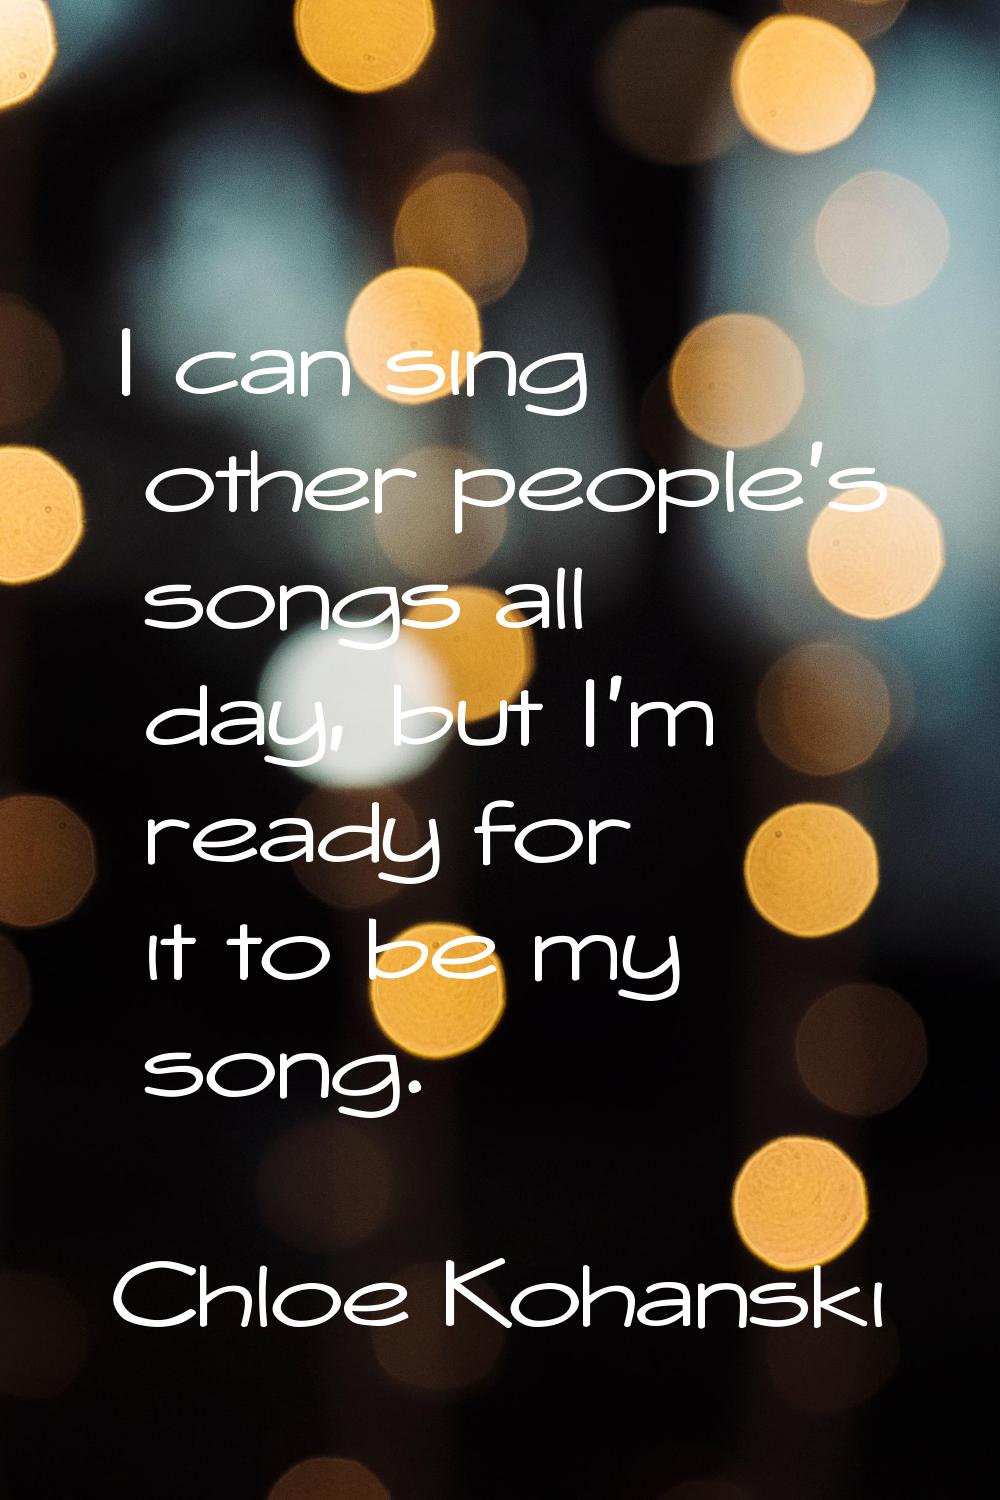 I can sing other people's songs all day, but I'm ready for it to be my song.